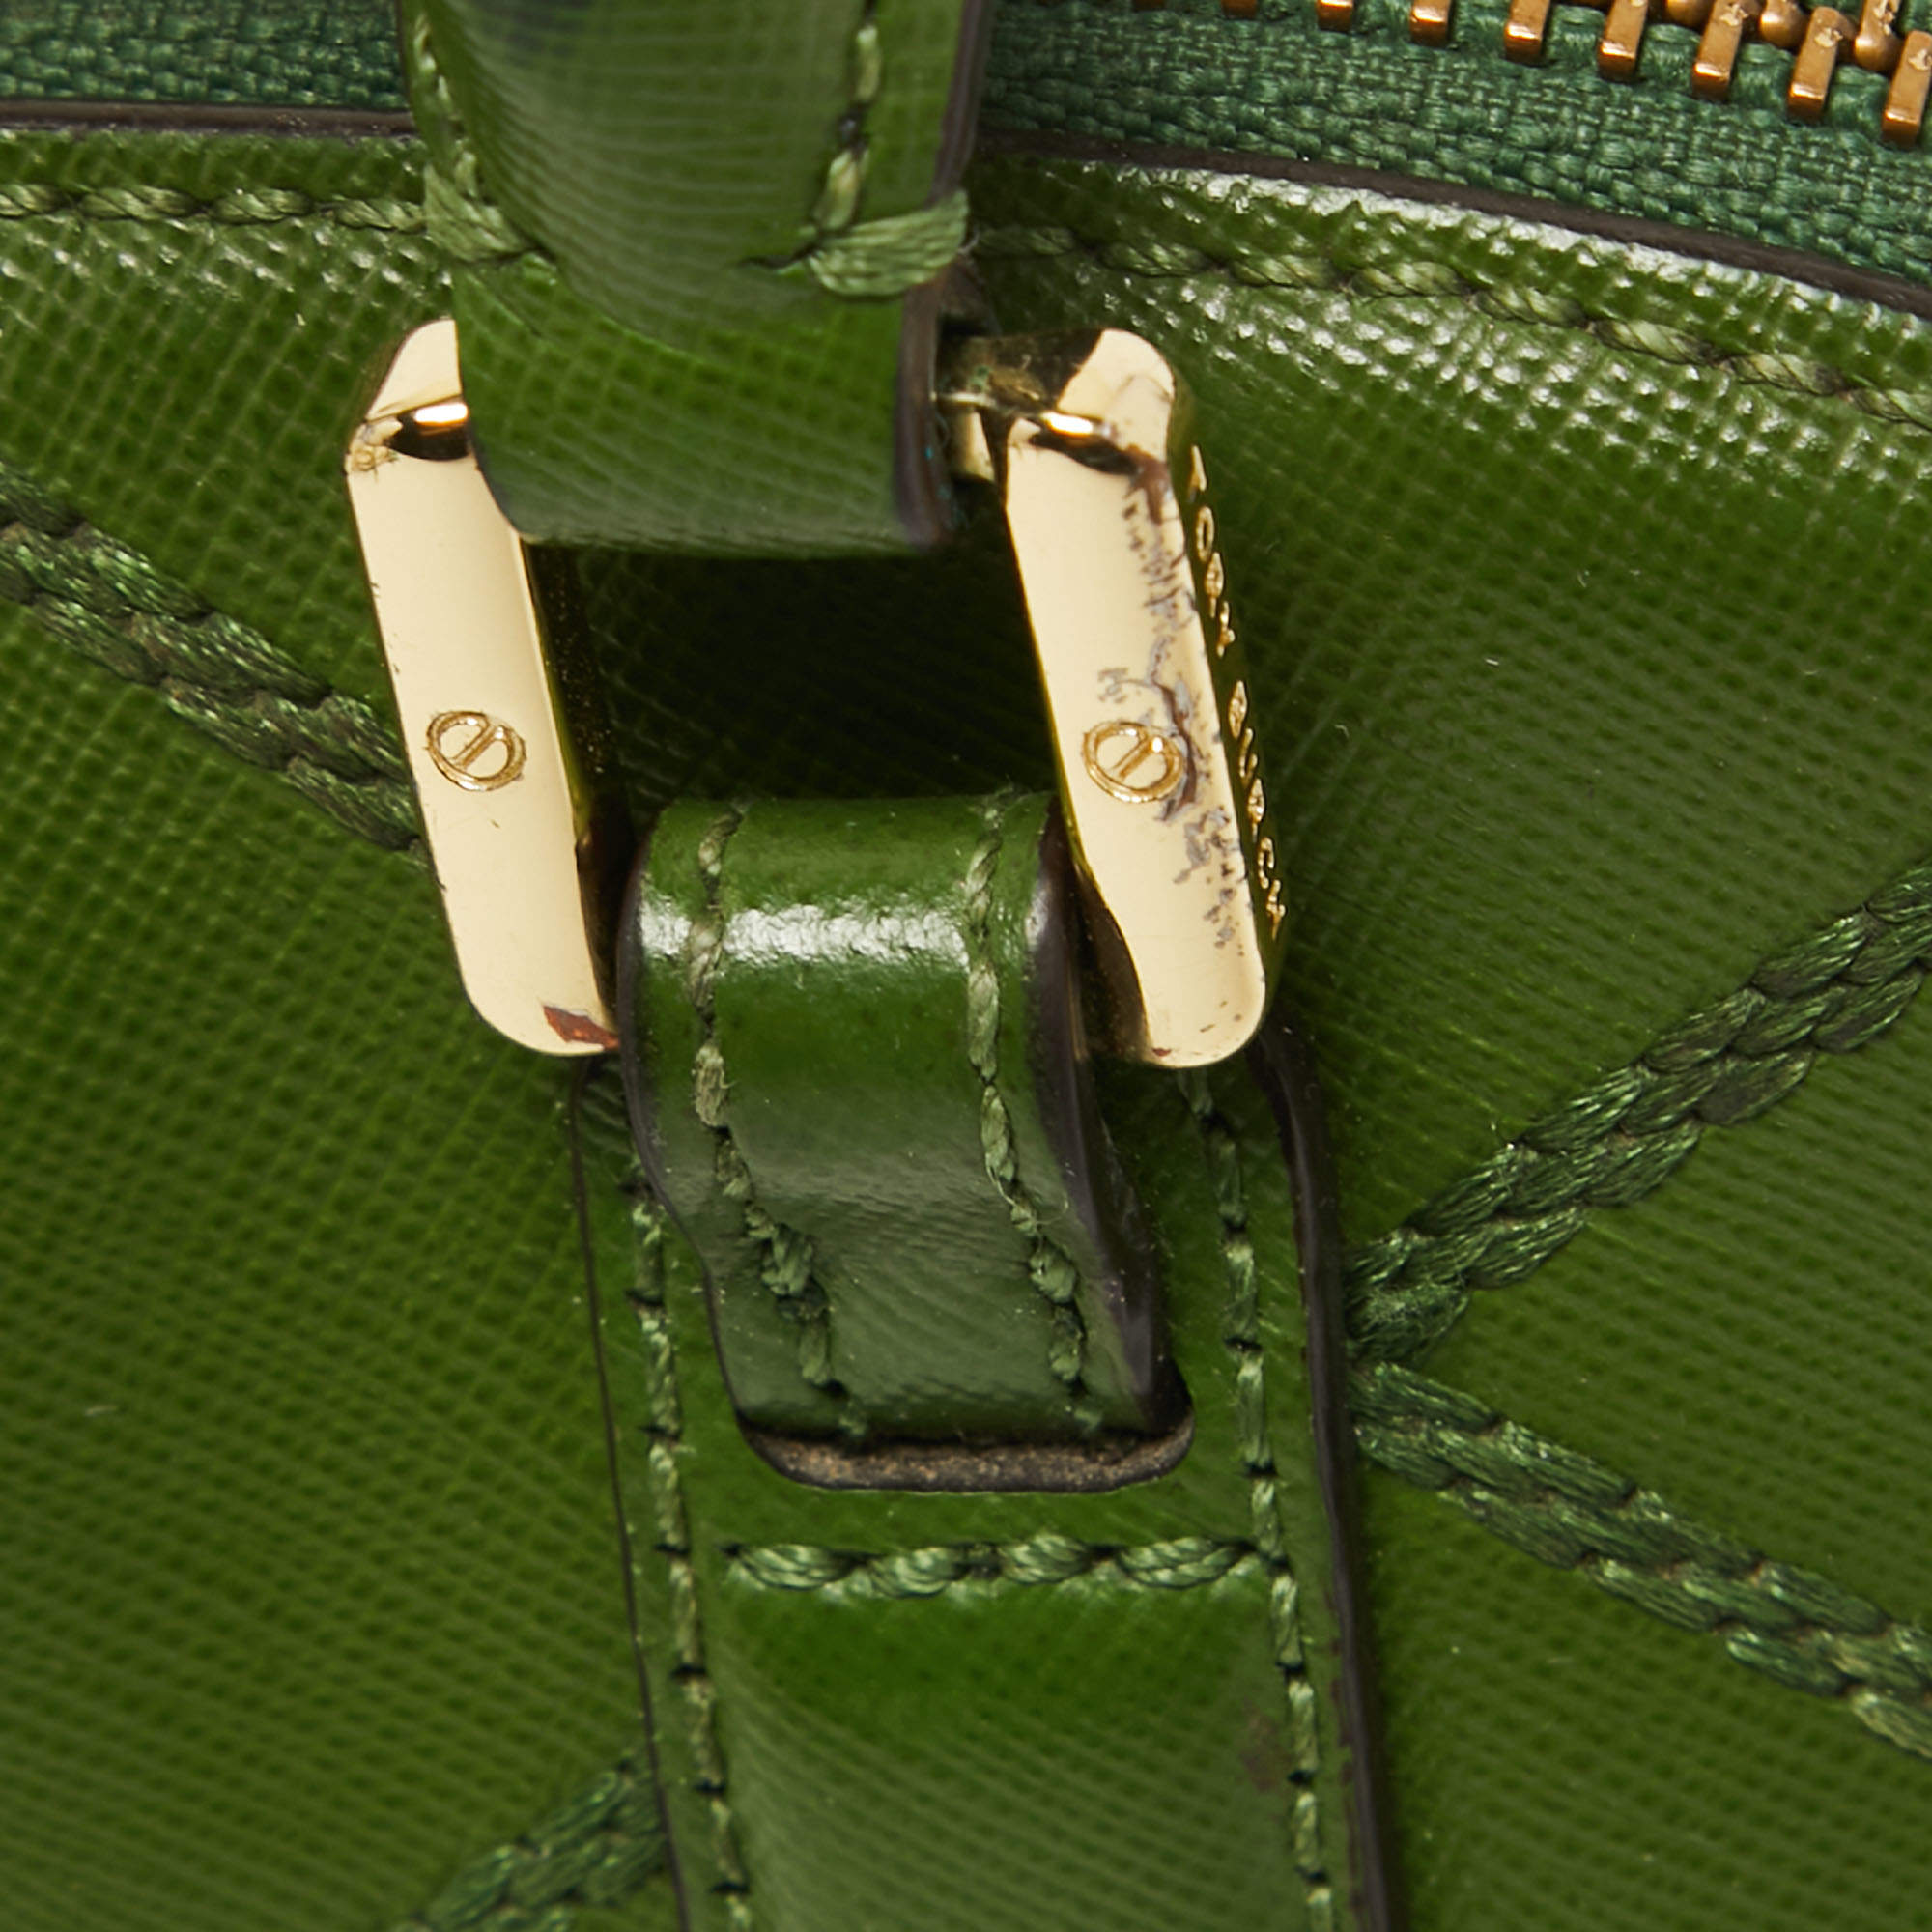 Tory Burch Green Wildstitch Quilted Leather Robinson Dome Satchel Tory Burch